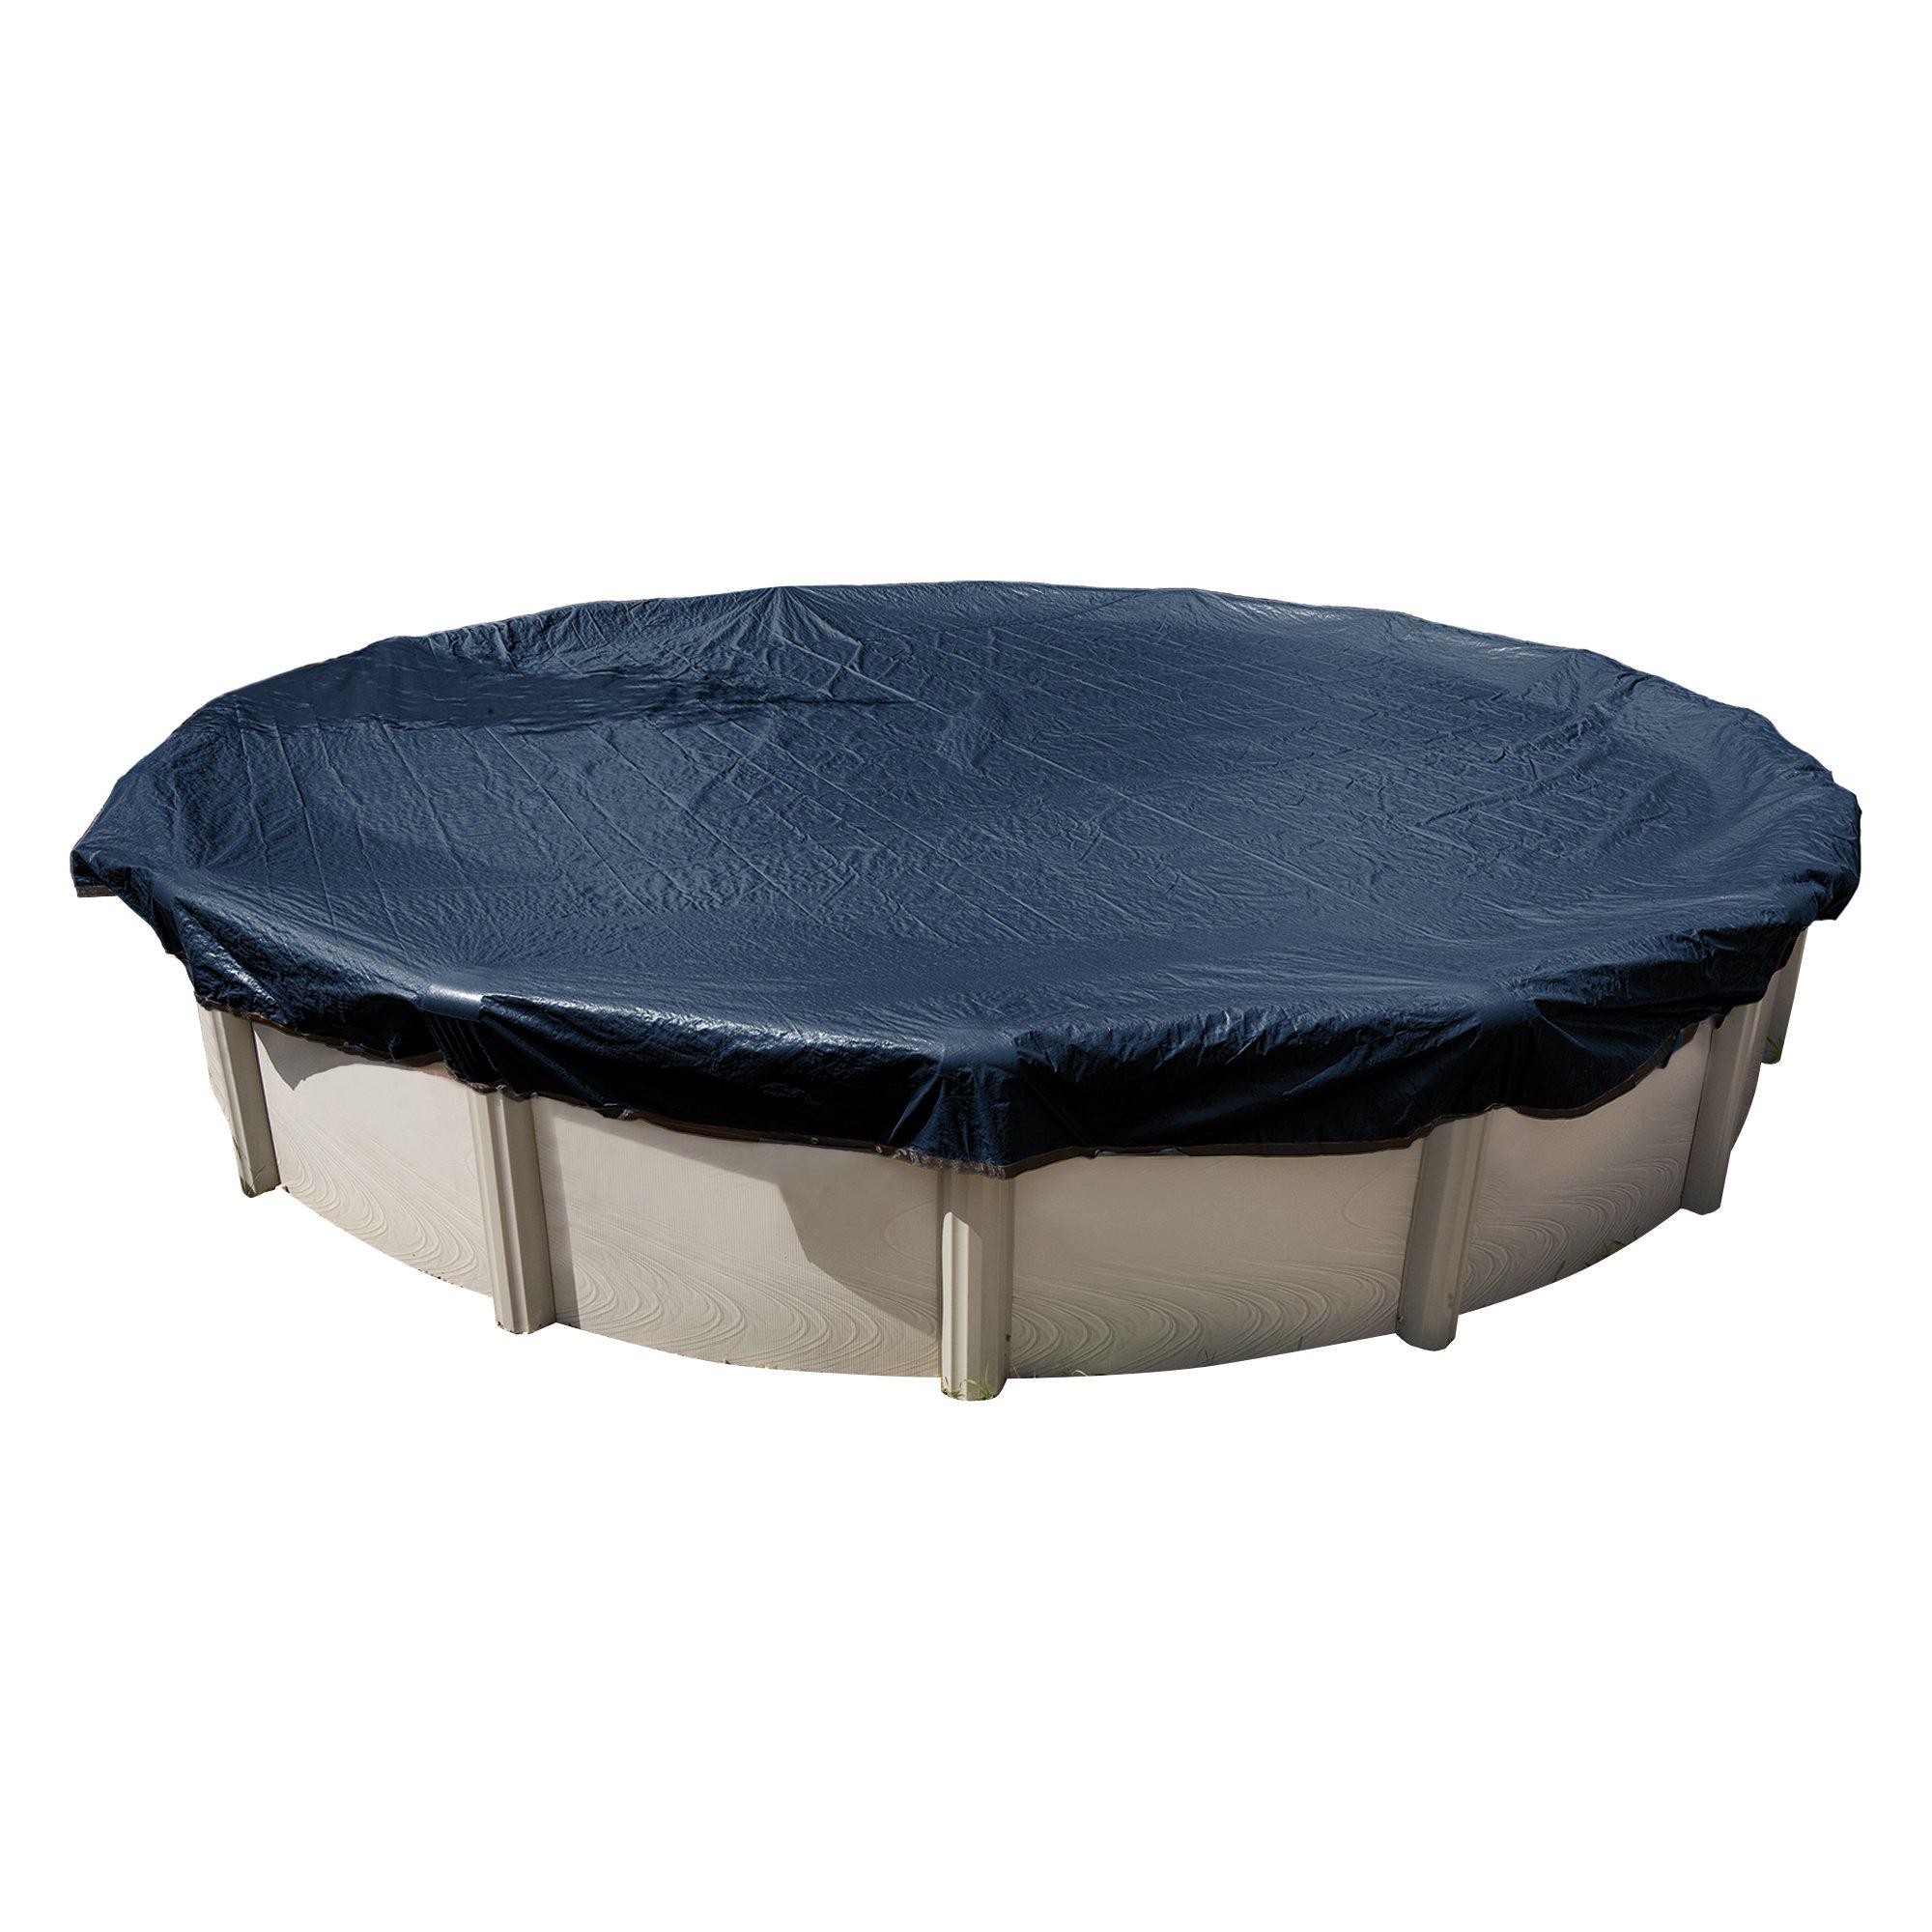 Midwest Canvas 28' Round Winter Pool Cover, 8 Year Warranty, Blue ...